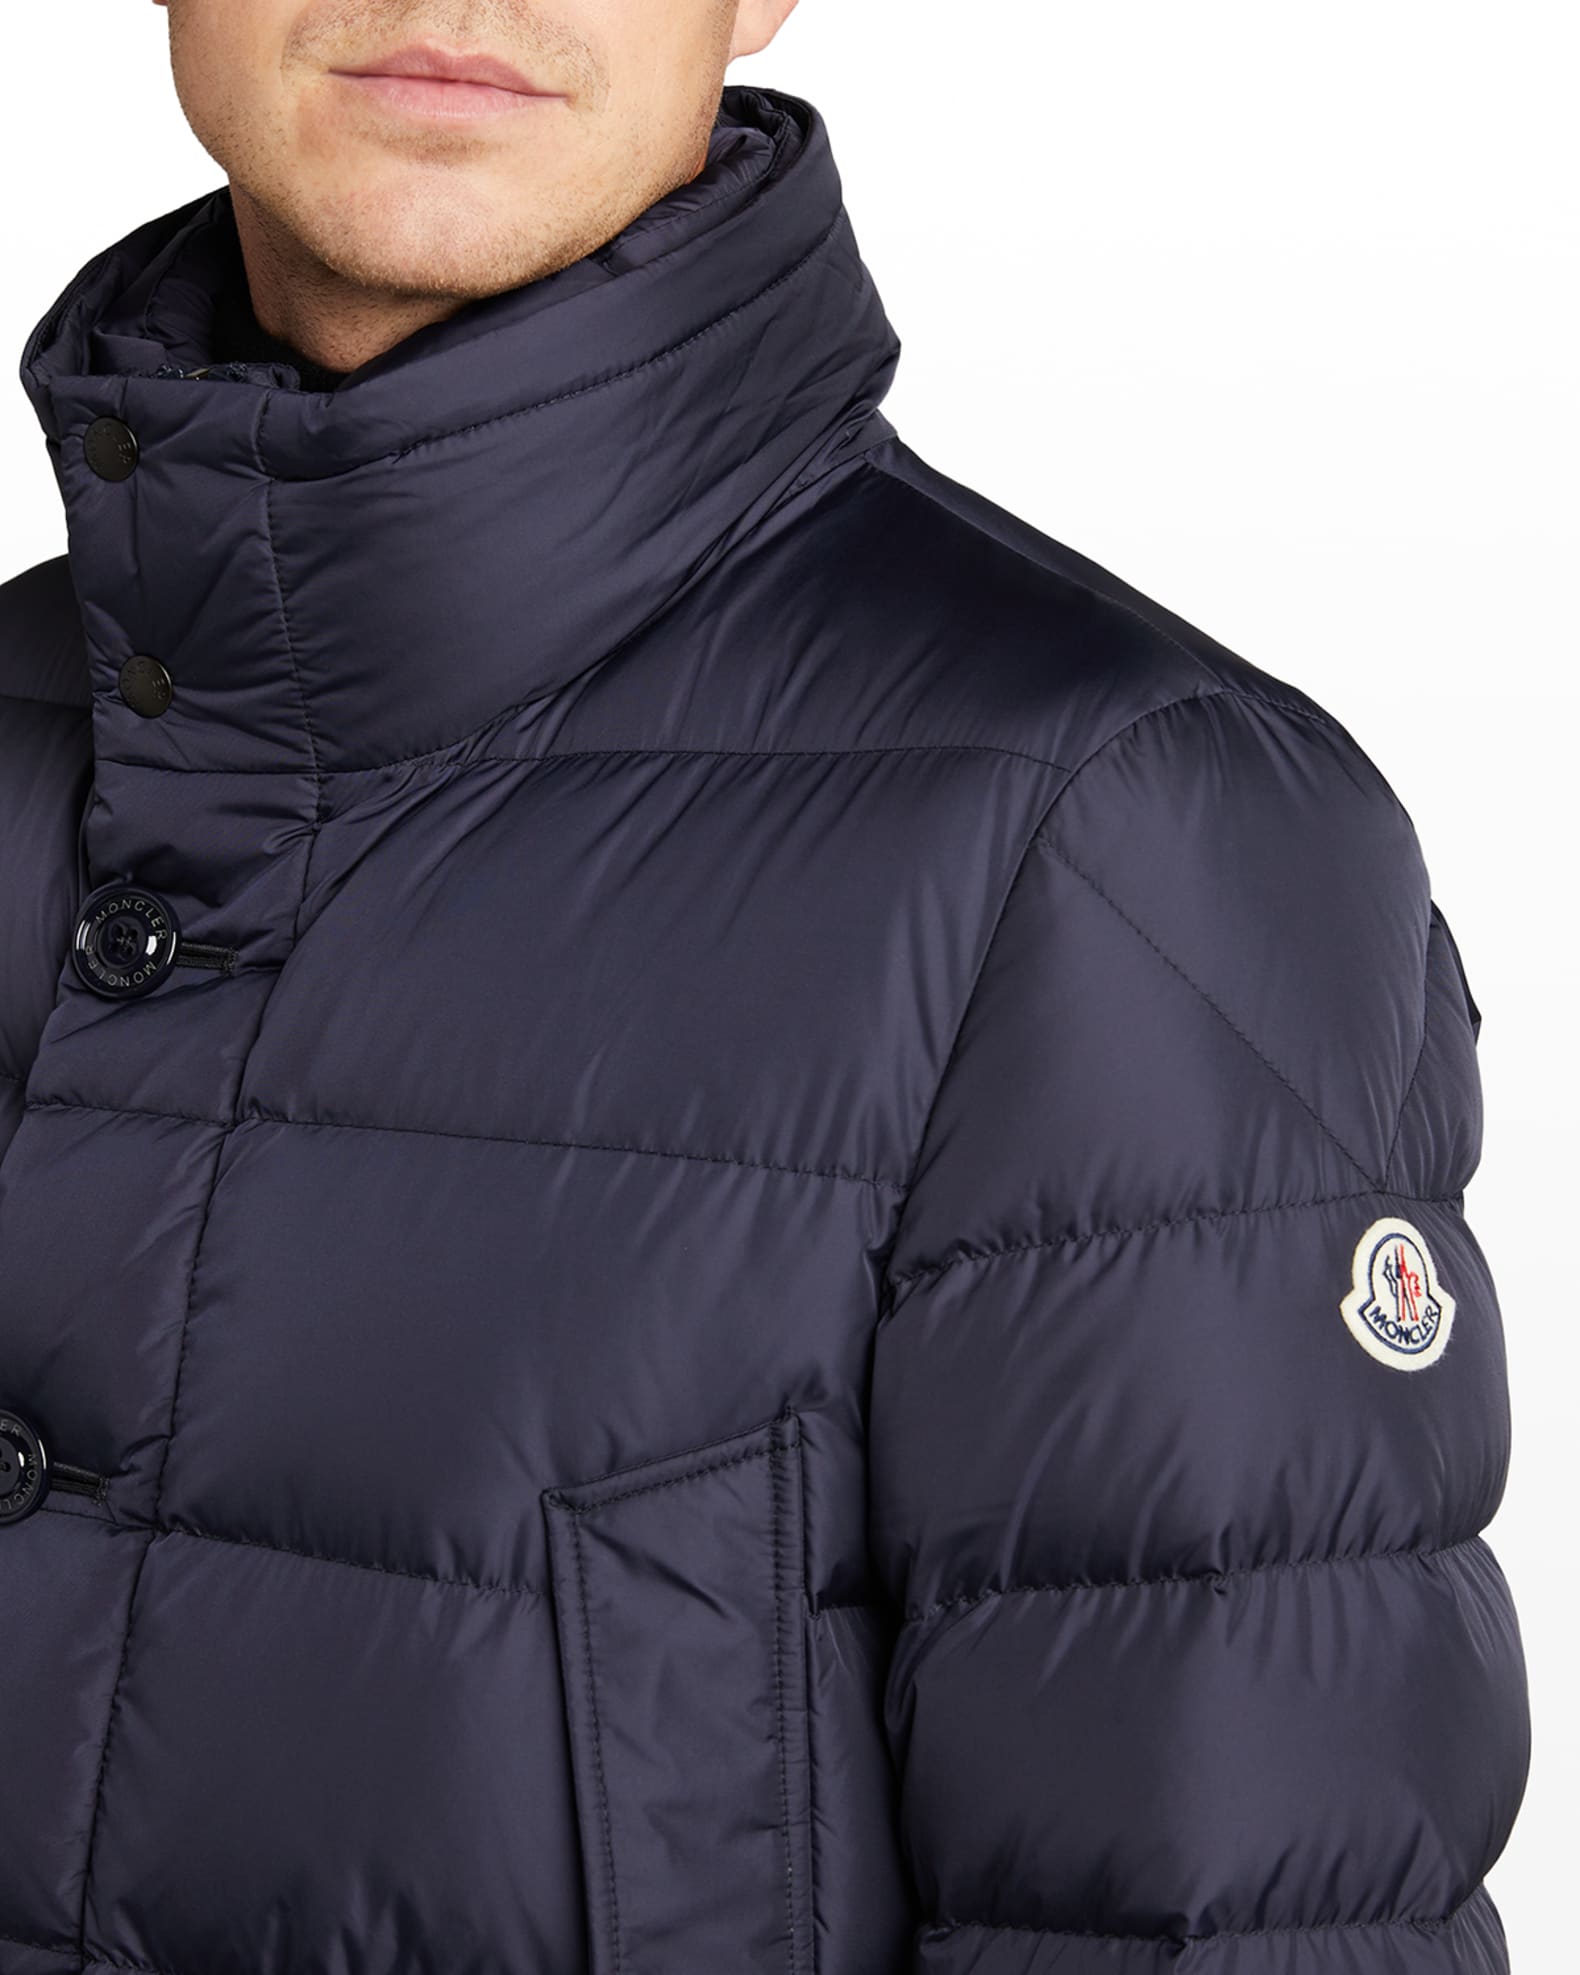 Moncler Men's Cluny Quilted Puffer Jacket w/ Fur Trim | Neiman Marcus